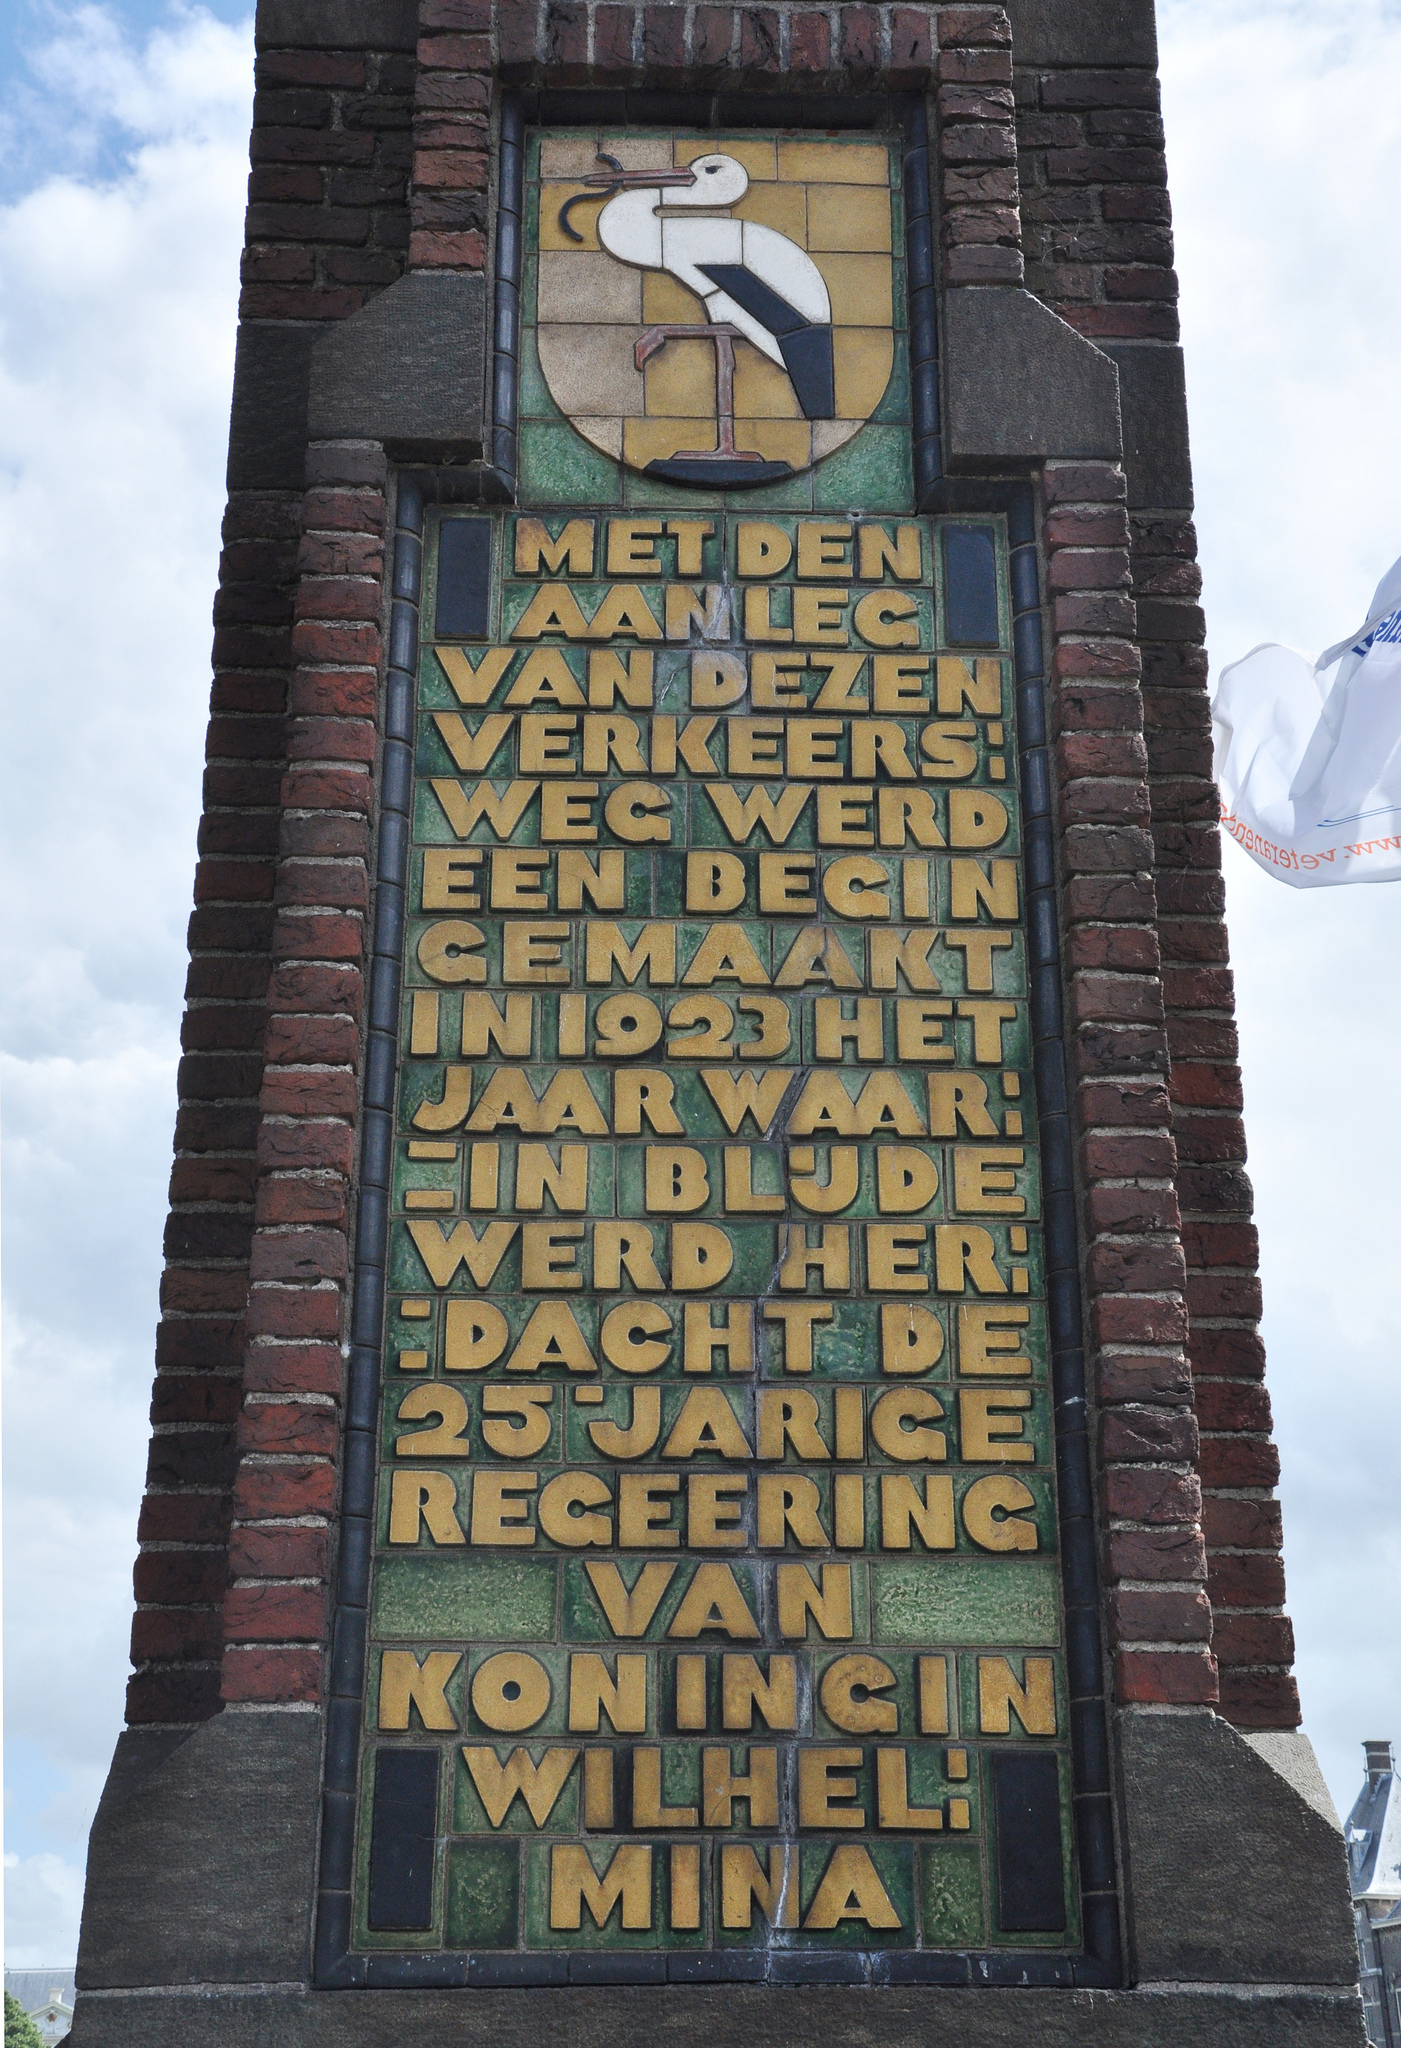 A photograph of the original monument on the Buitenhof in The Hague, a memorial plaque designed by Berlage and with lettering by Piet Zwart. This lettering is the source of the typeface Monumental Grotesk.